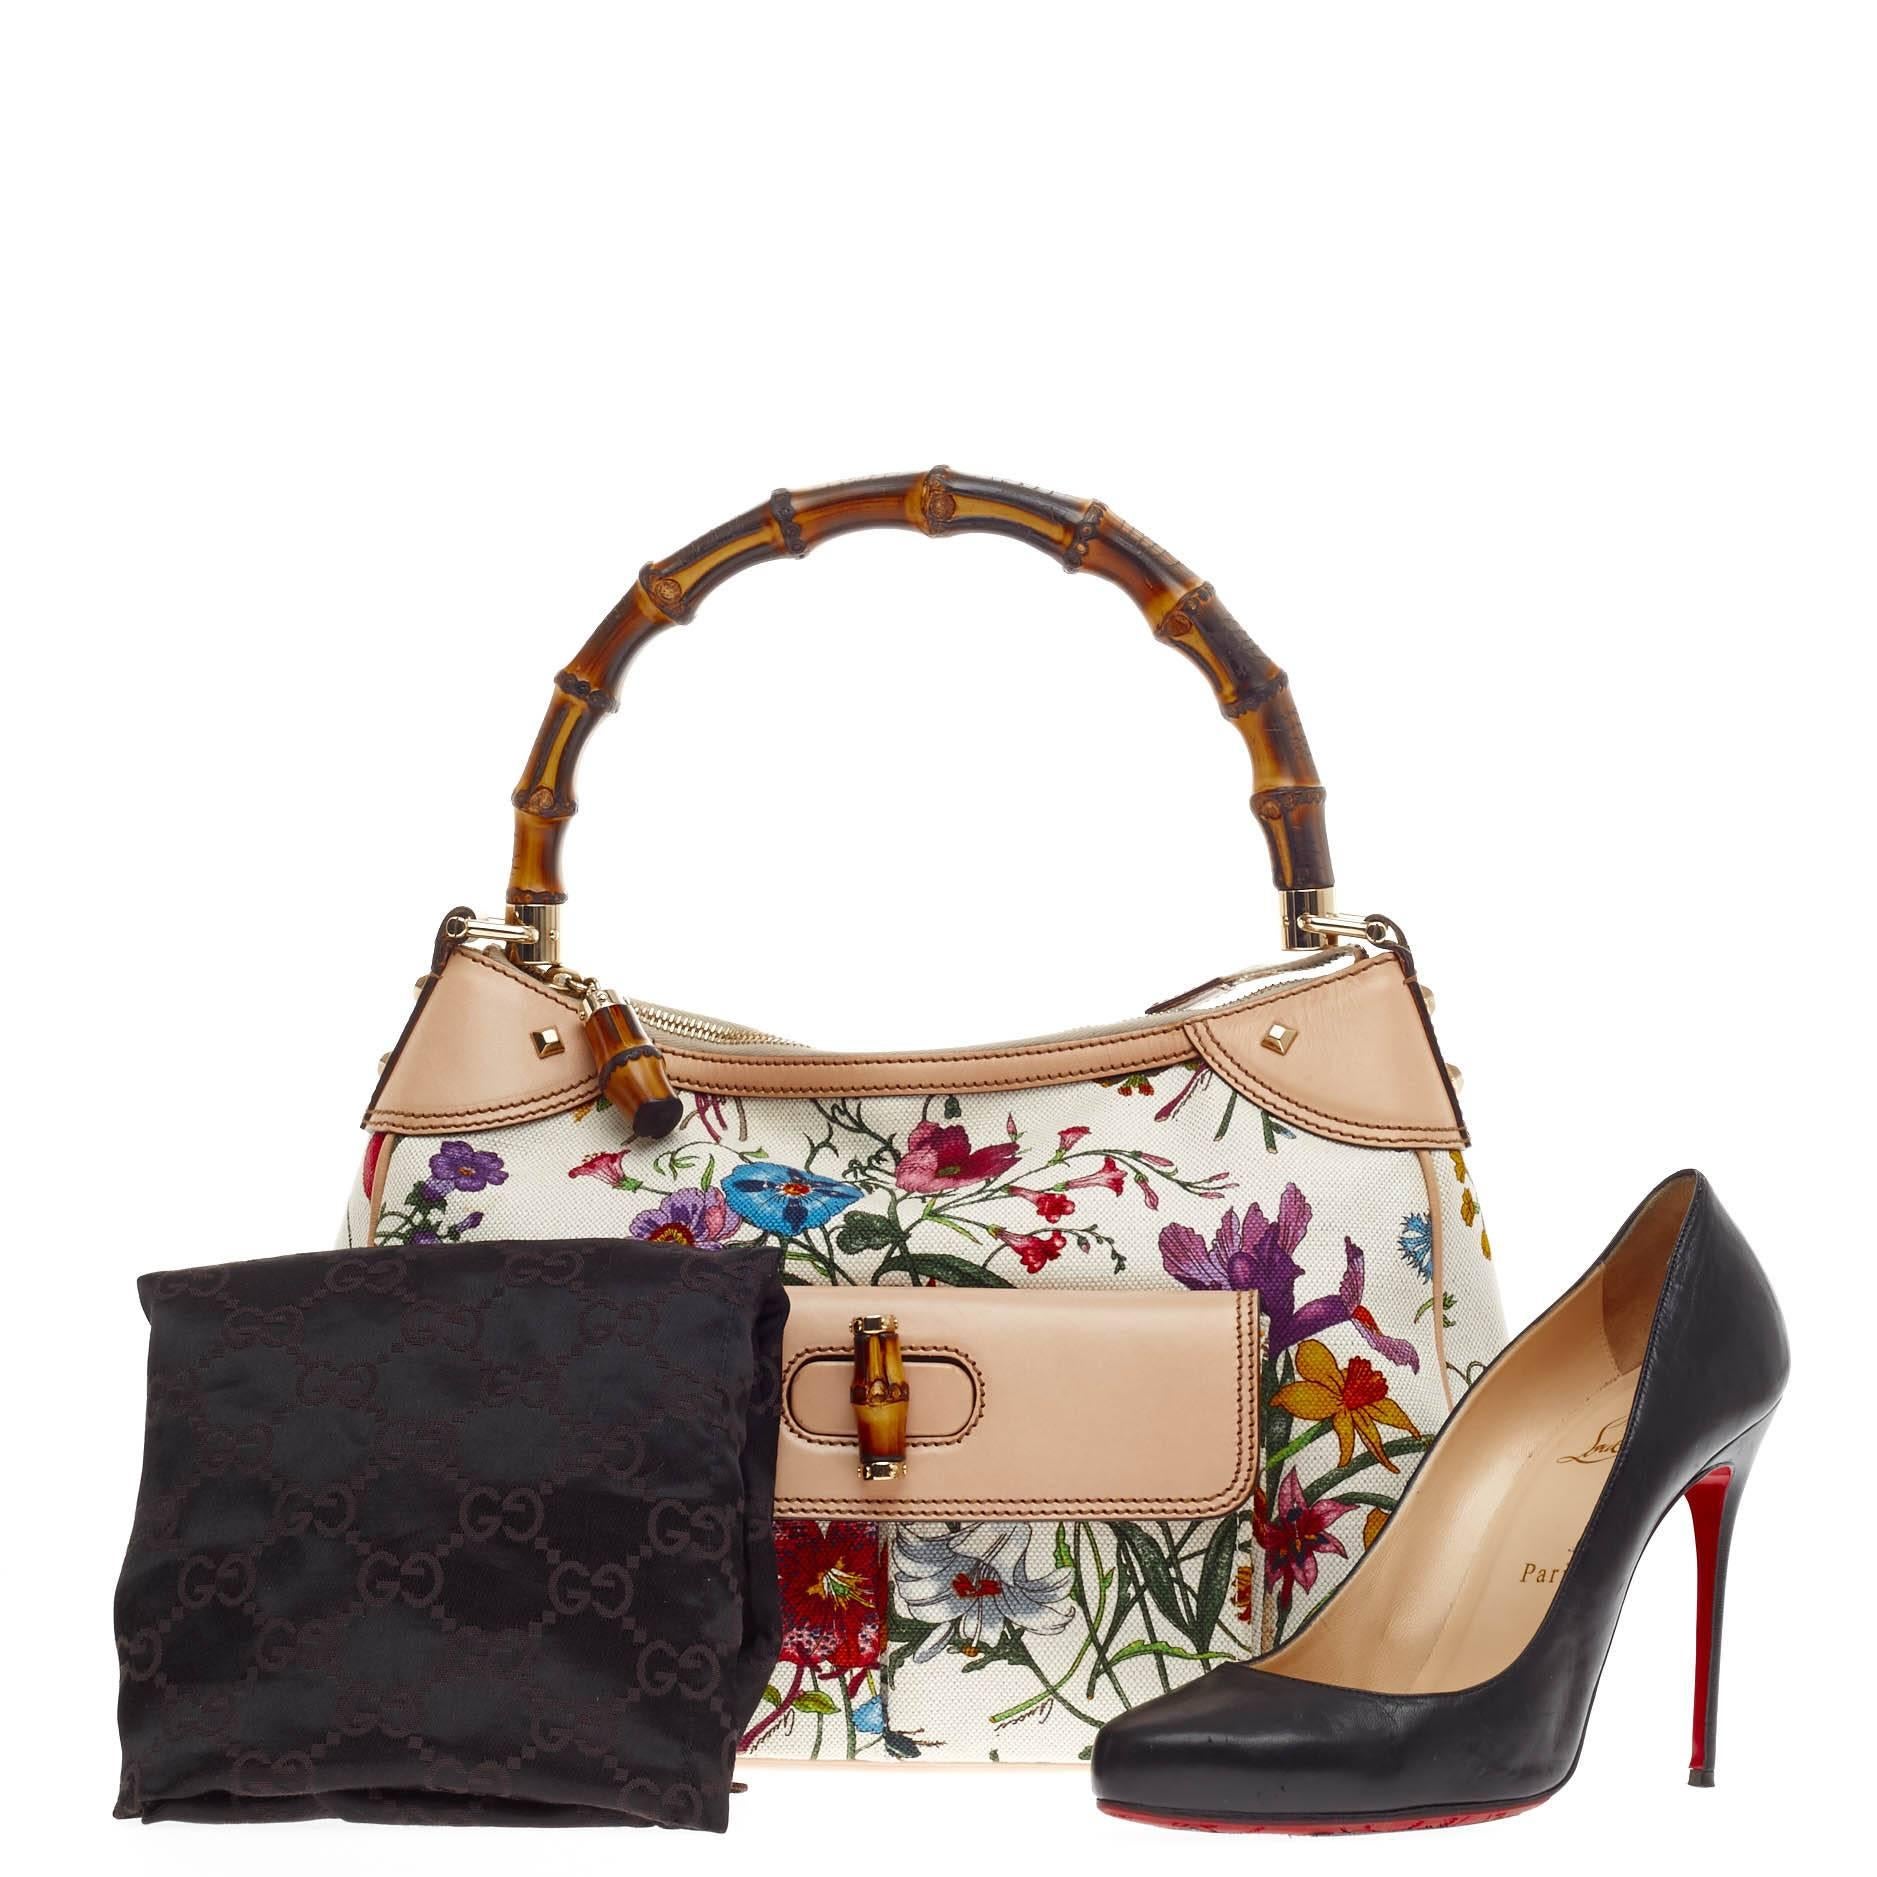 This authentic Gucci Bamboo Front Pocket Shoulder Bag Flora Canvas is your perfect companion for summer excursions. Crafted in Gucci's signature botanical floral print in white canvas, this exquisite shoulder bag features looped bamboo top handles